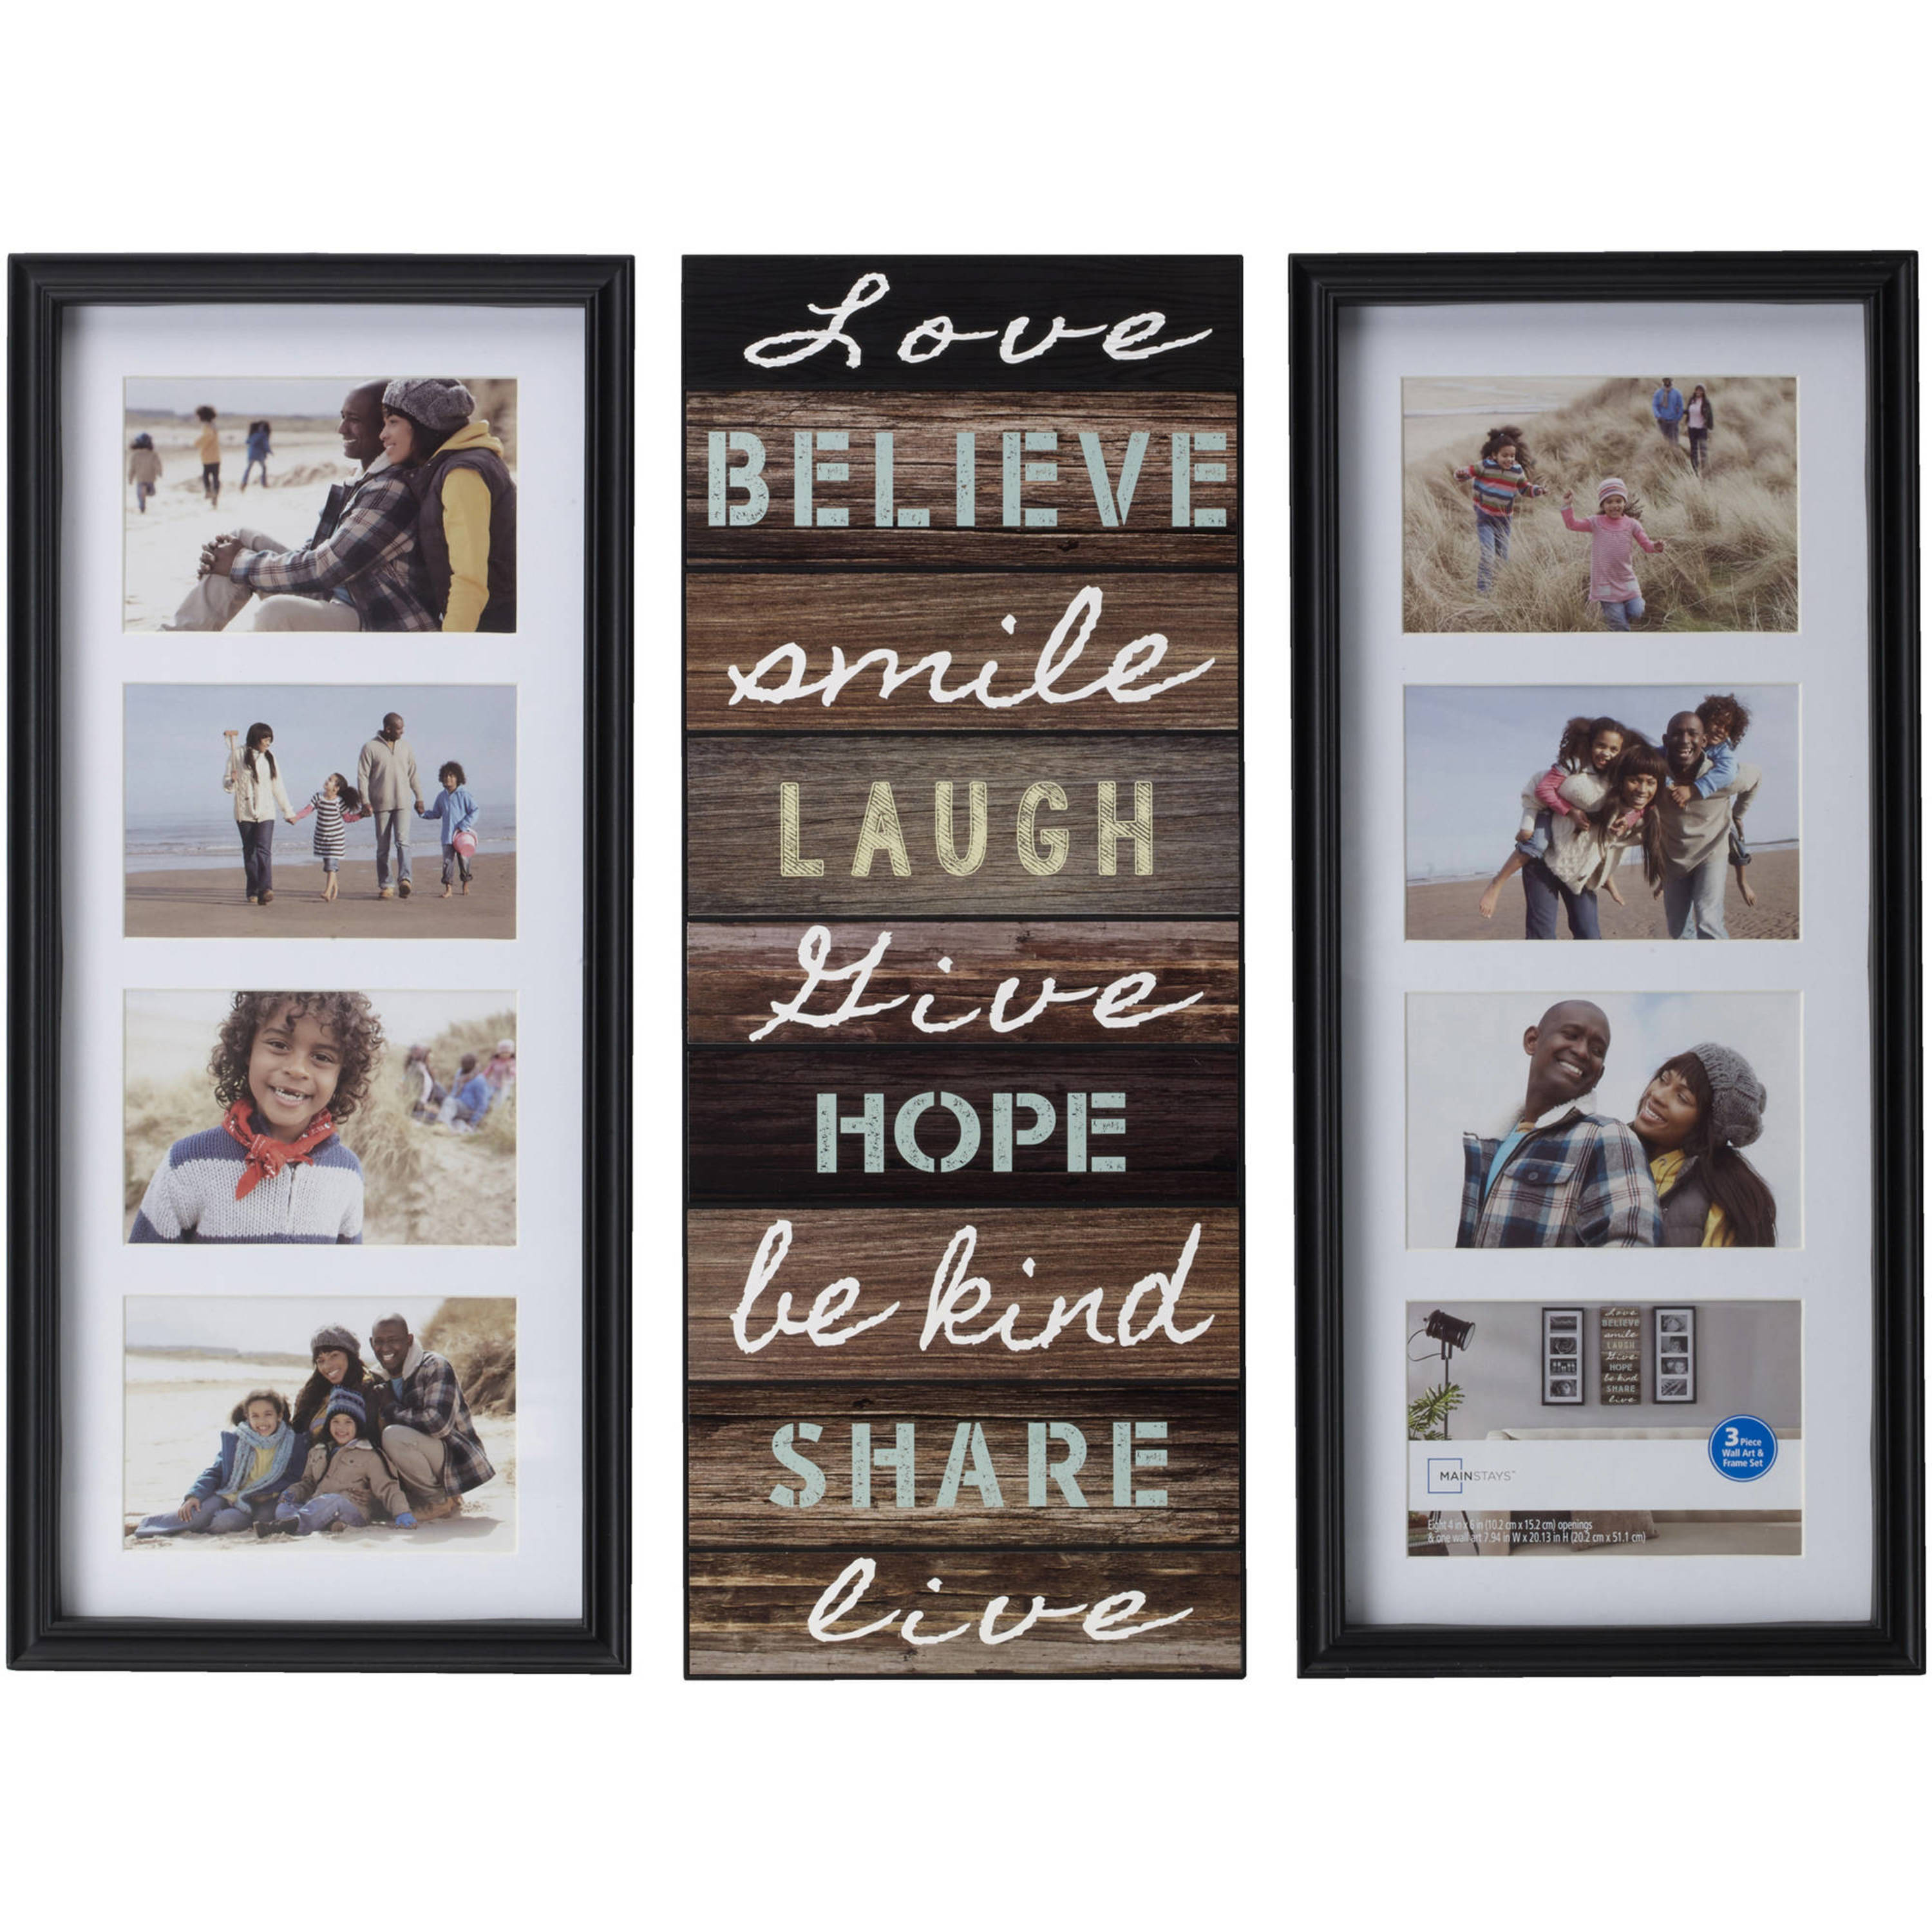 Mainstays Collage Picture Frames with Sentiment Plaque in Black (2 Frames and a Sentiment Wall Decor) - image 2 of 5